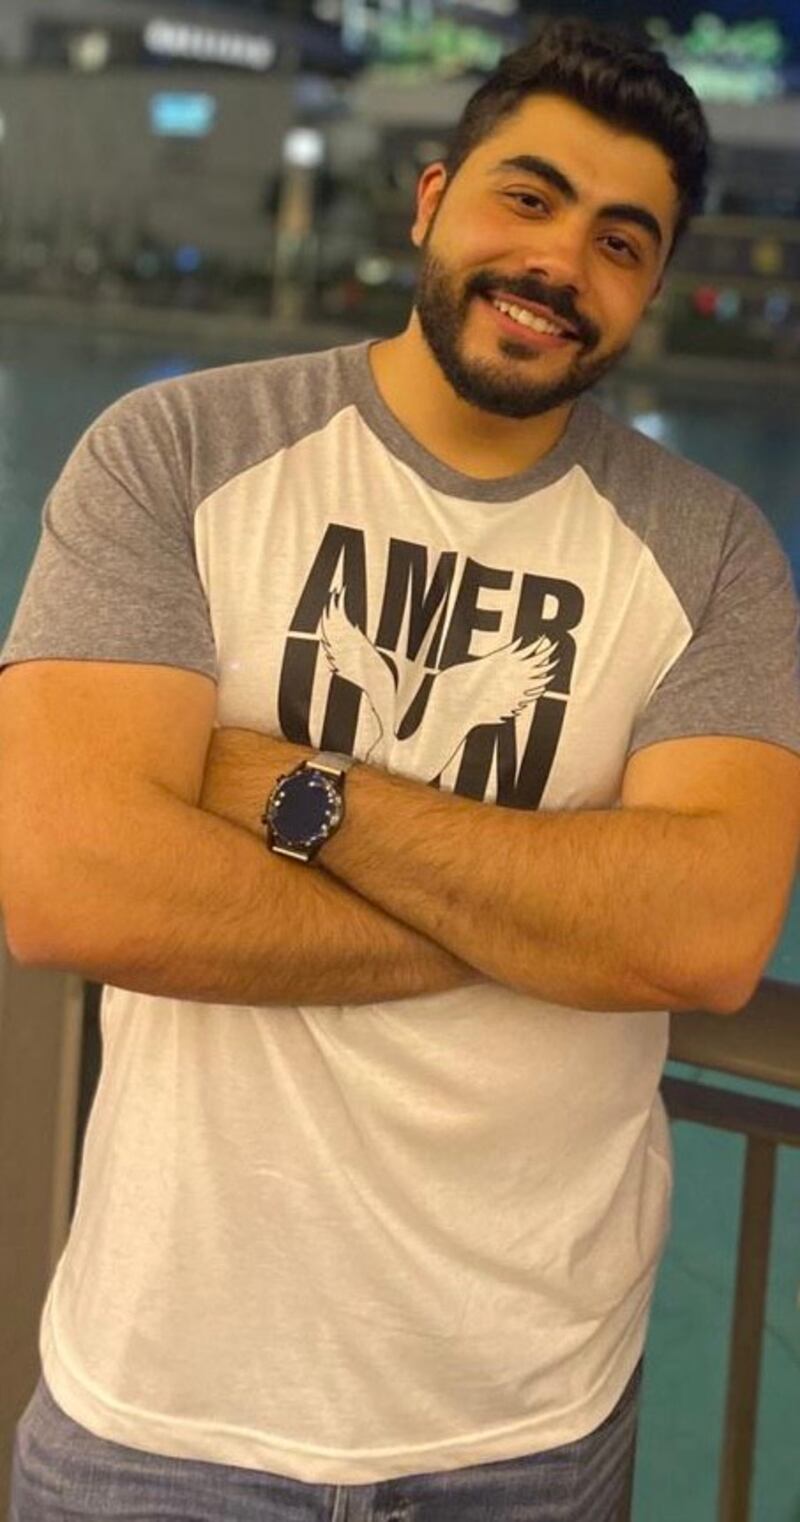 Hamza Matahen moved to Dubai for better job opportunities. He says the diversity in Dubai is helping him grow as a person and better understand other people’s backgrounds. Photo: Hamza Matahen